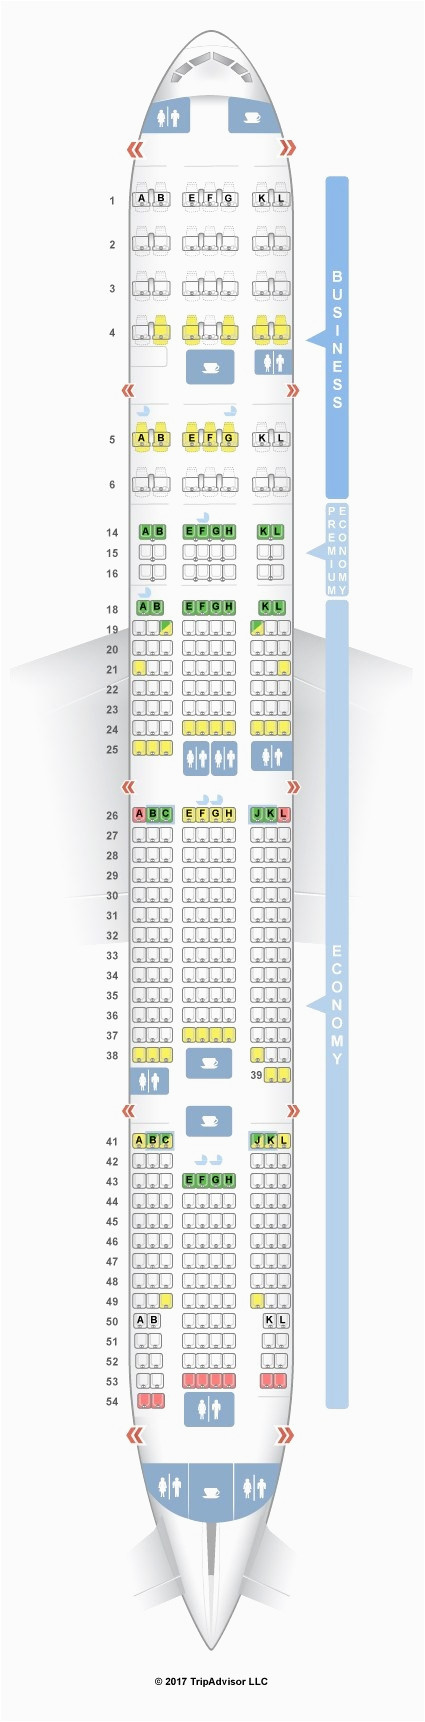 air canada aircraft 777 seating plan the best picture sugar and